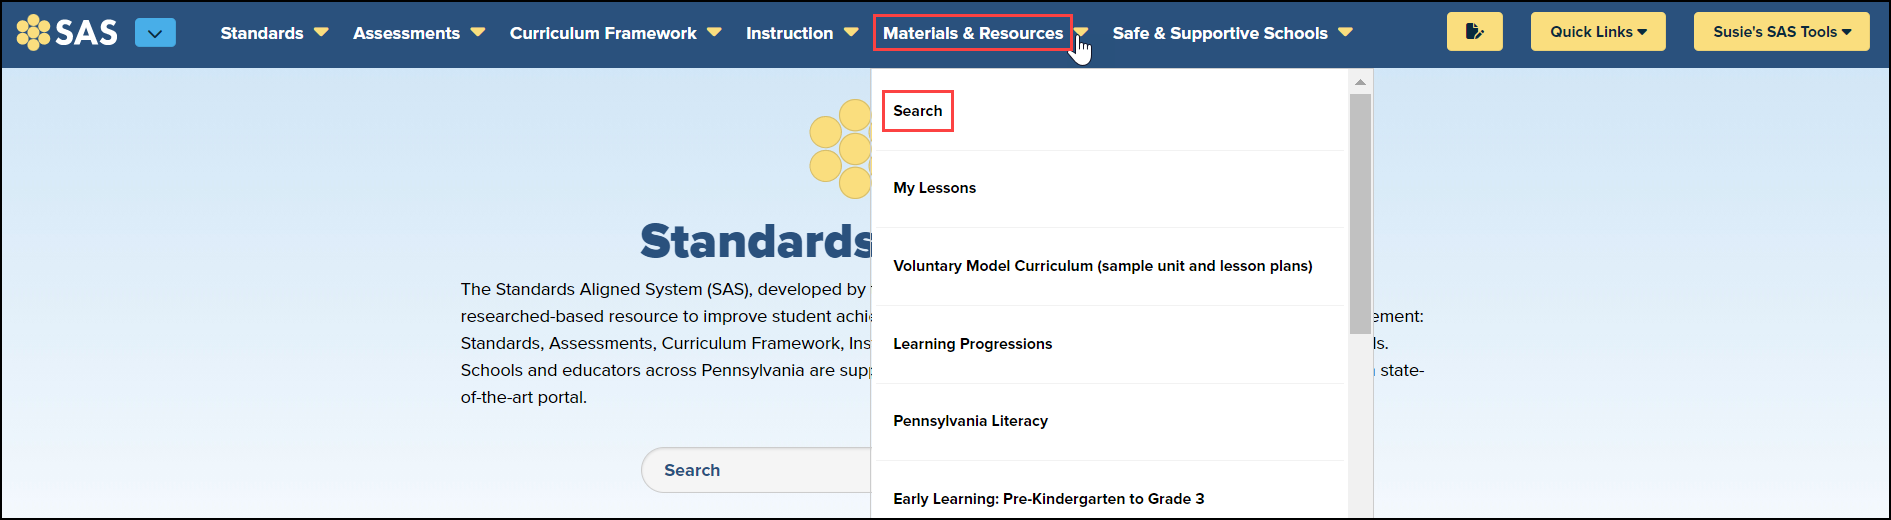 sas site header with materials and resources highlighted and dropdown menu expanded with search highlighted